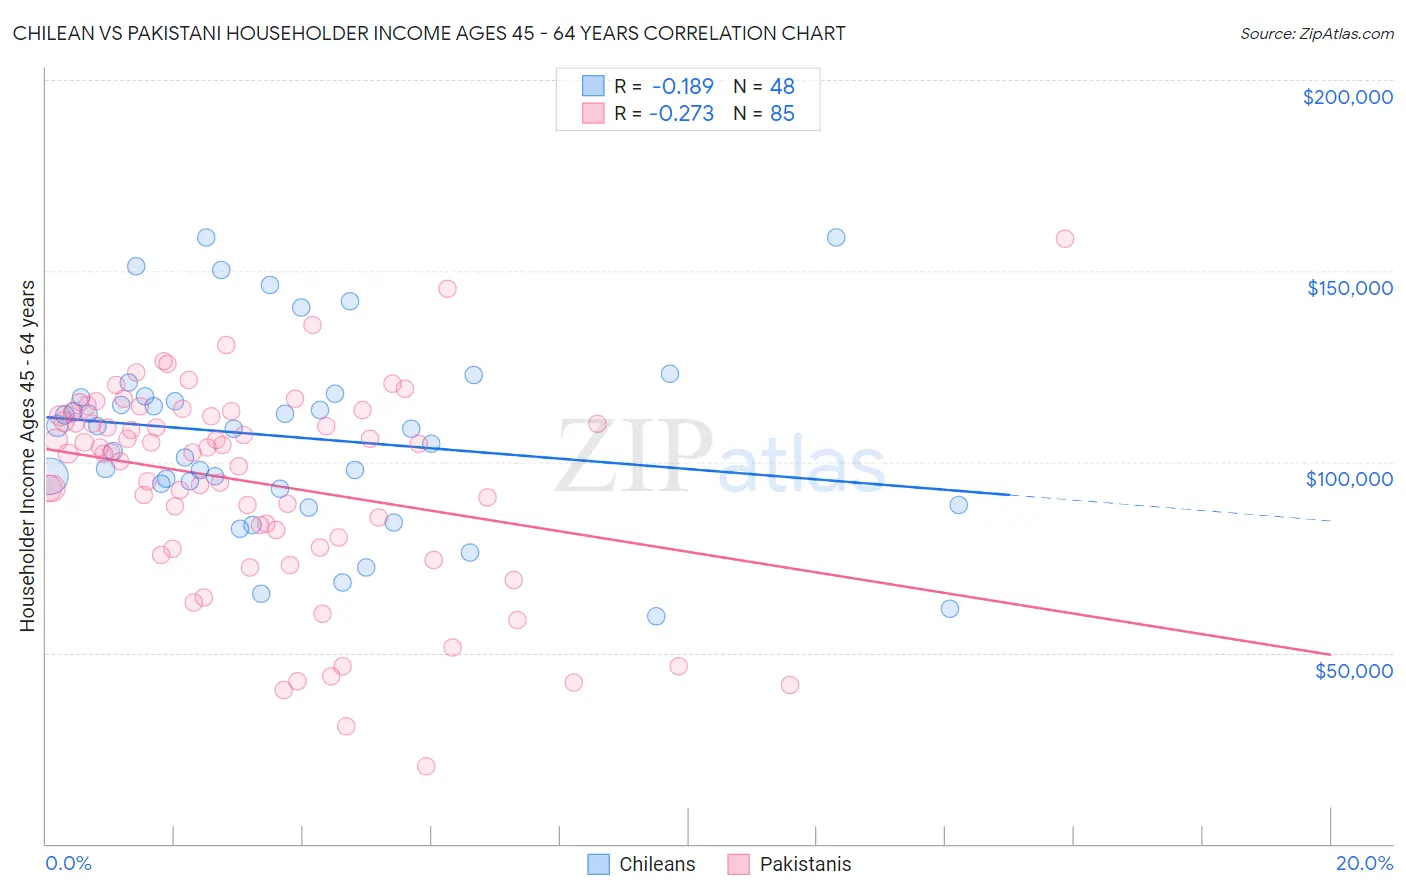 Chilean vs Pakistani Householder Income Ages 45 - 64 years